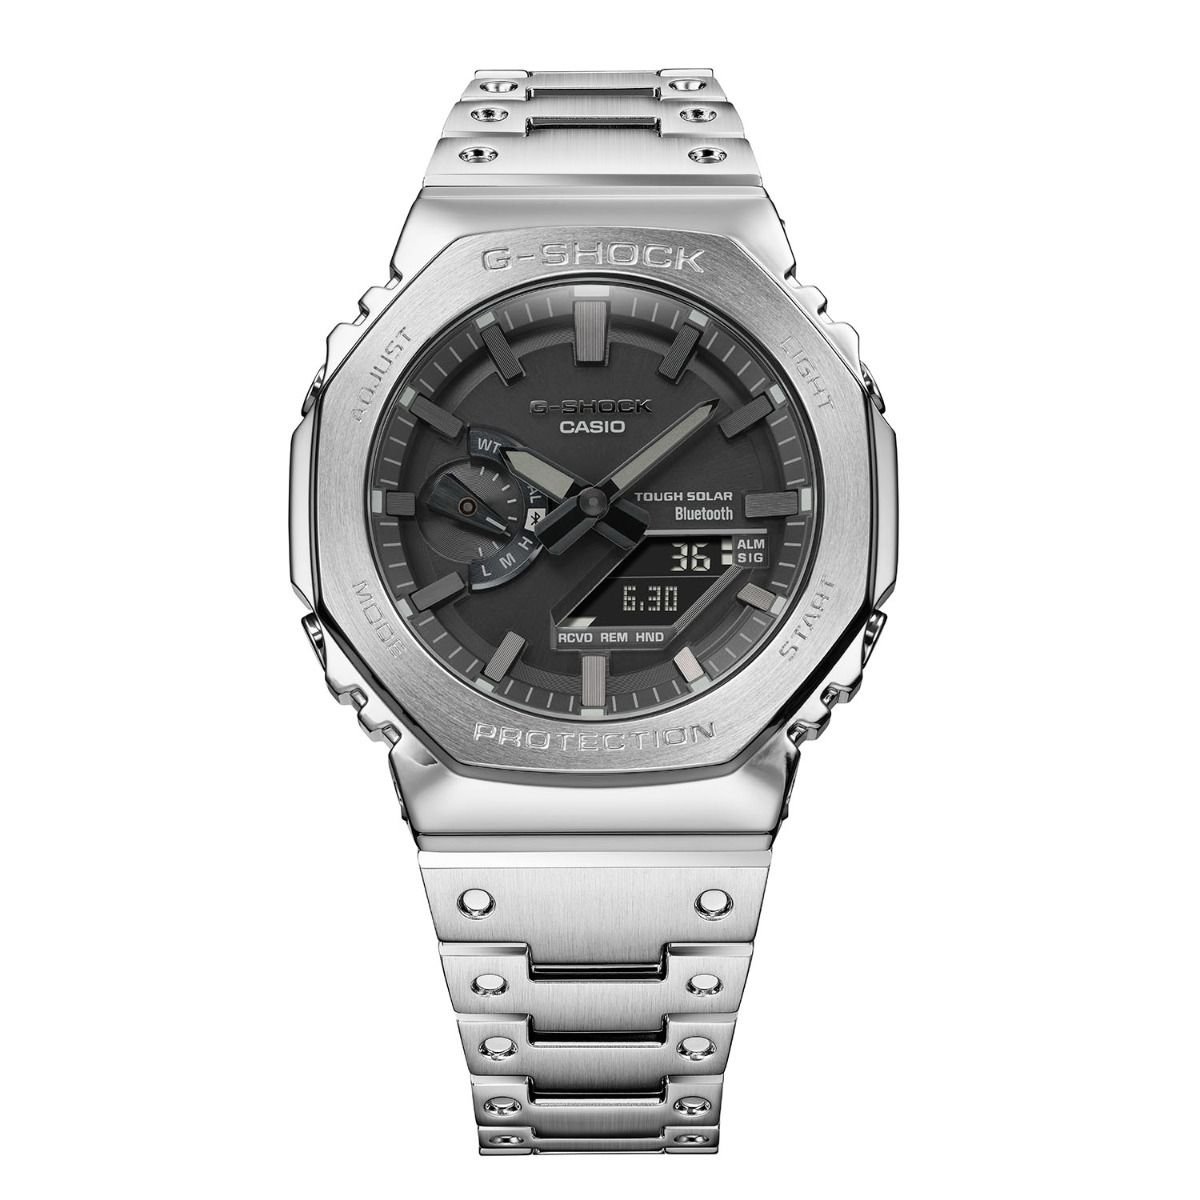 Casio G-Shock GA-2100 \'CasiOak\' Review: Is It Still Worth Buying? —  TheWatchMuse